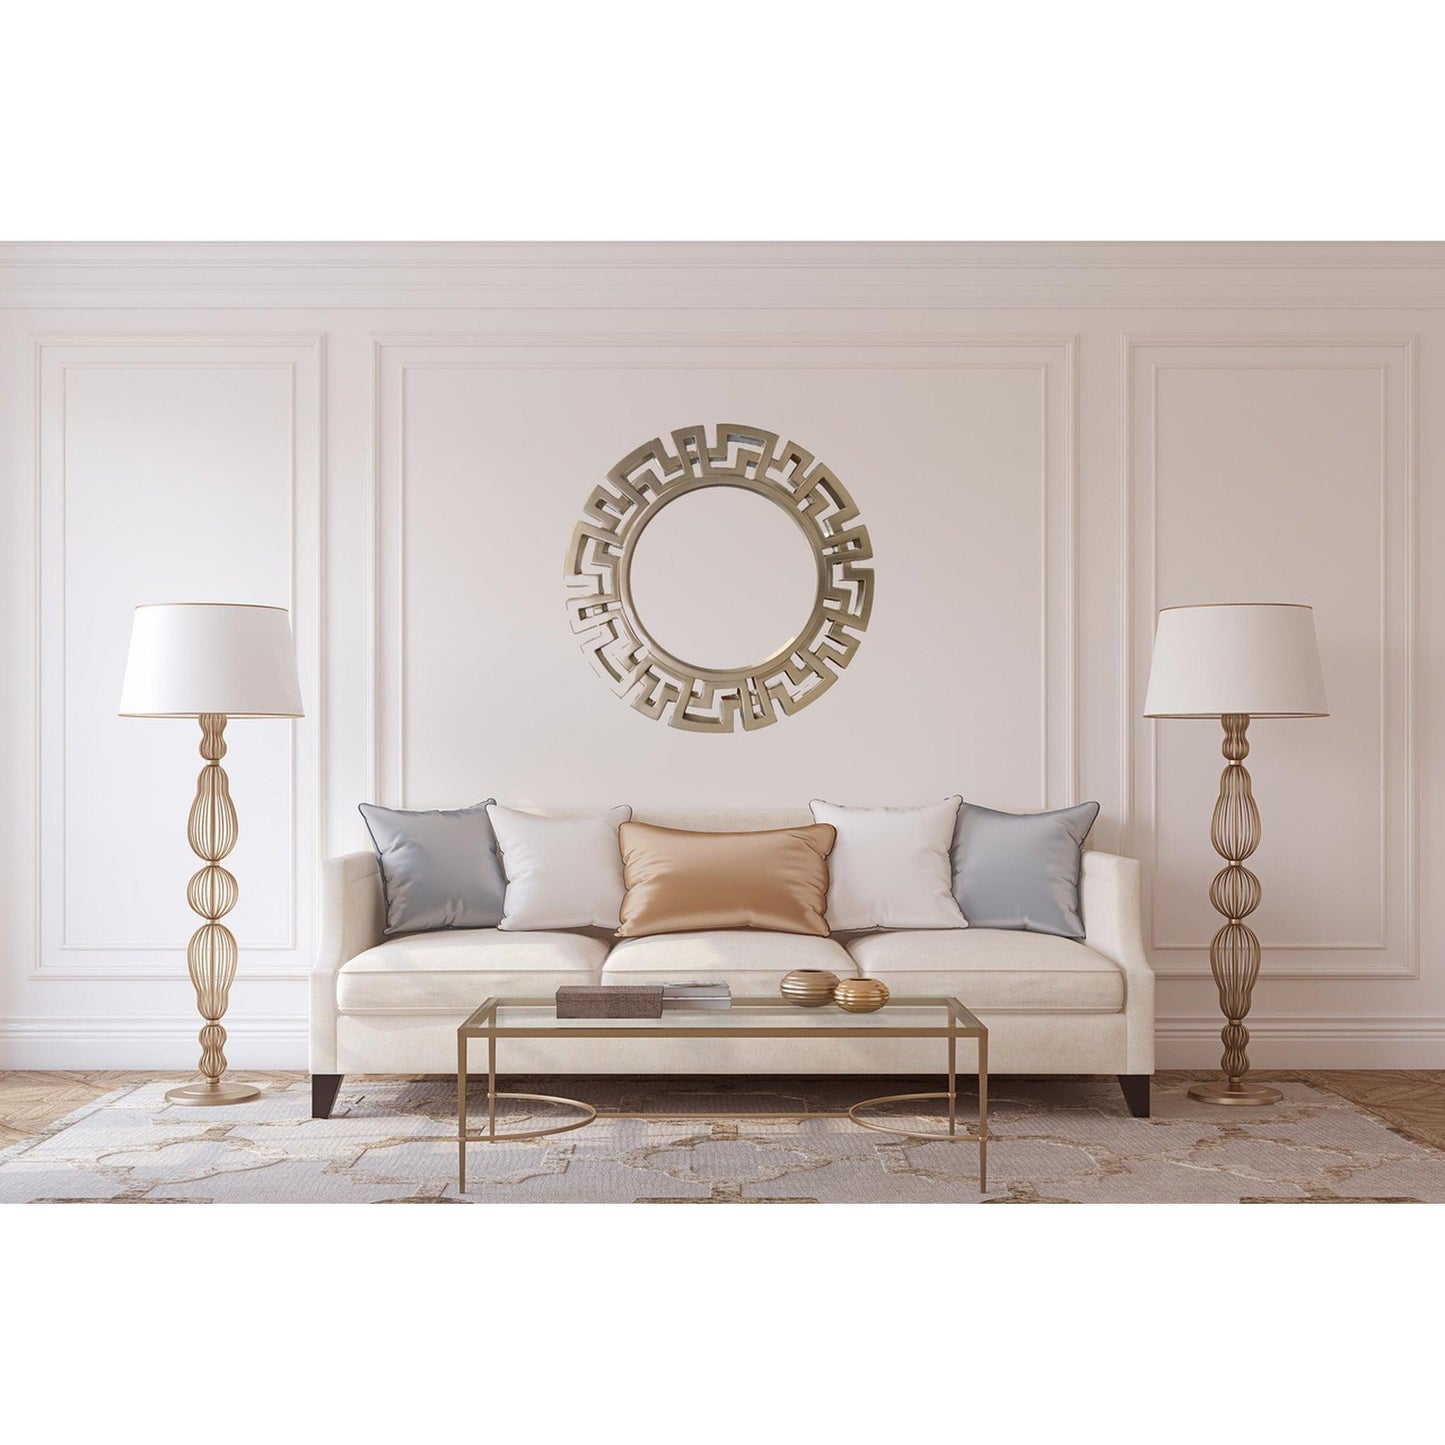 SBC Decor Athena 30" x 30" Wall-Mounted Glass Resin Accent Wall Mirror In Champagne Silver Finish